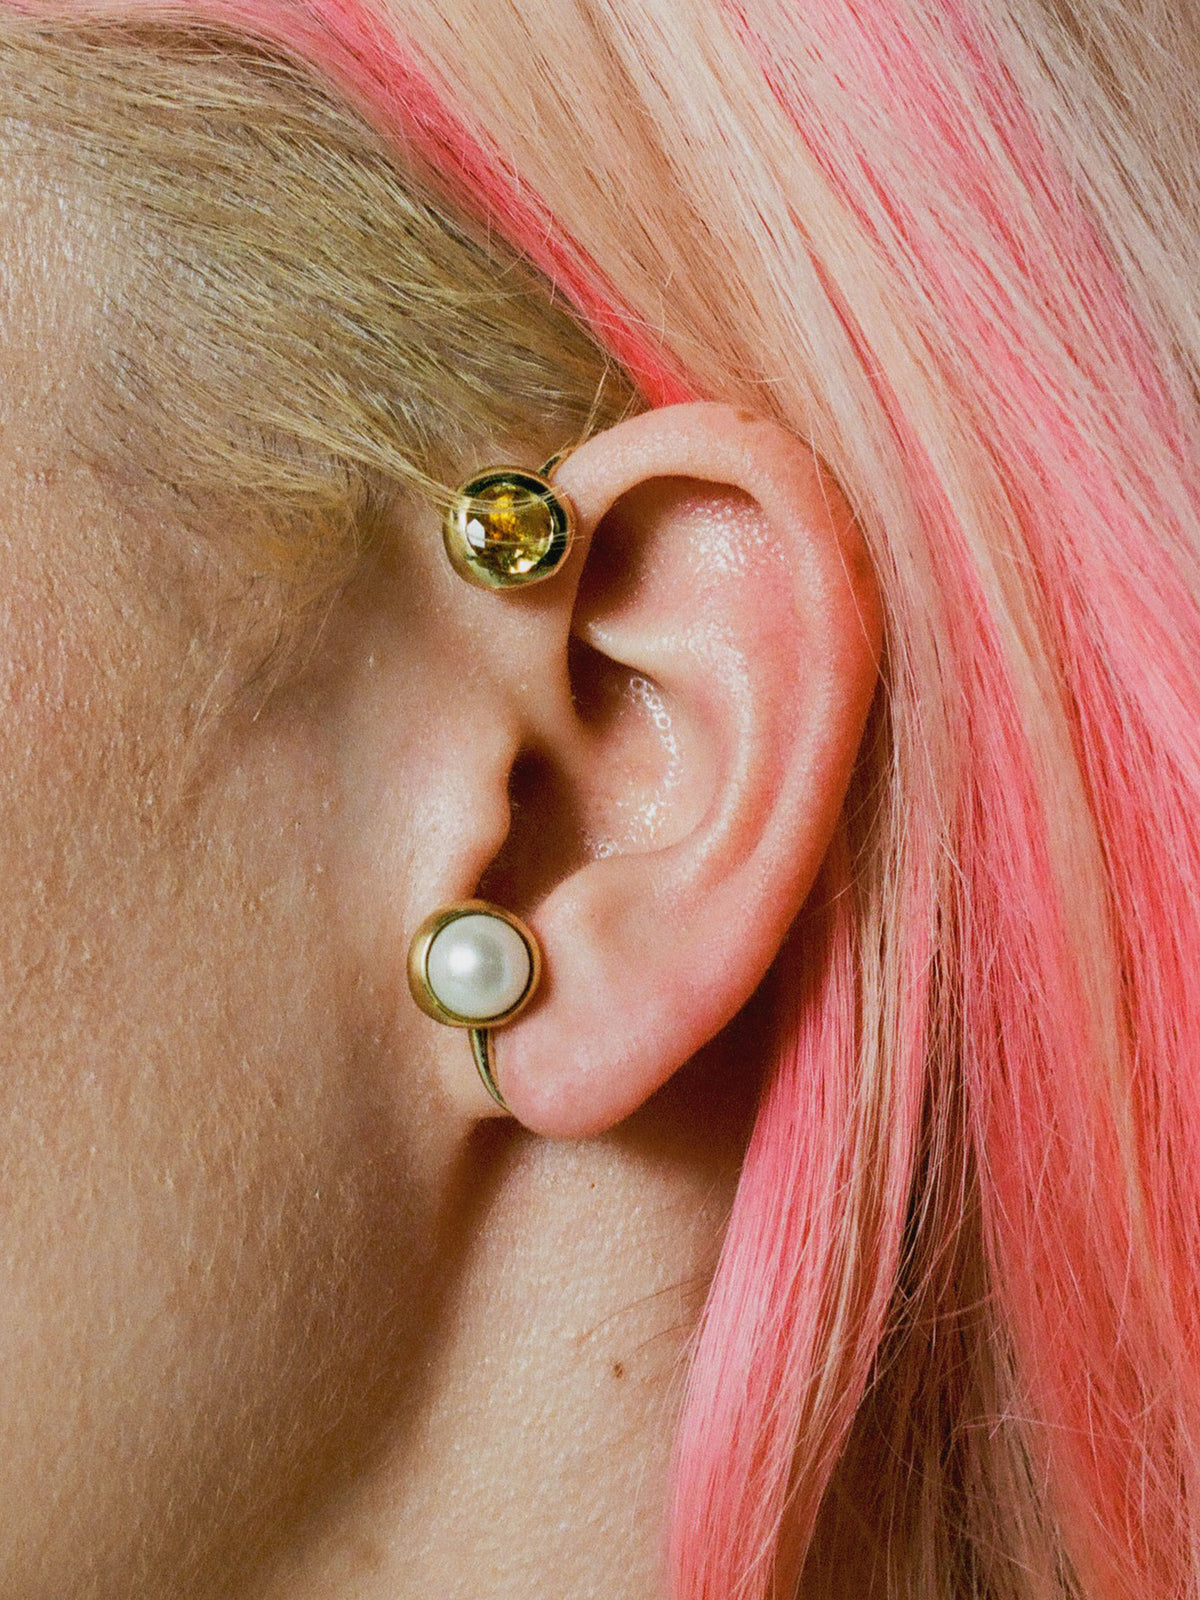 Model wearing the gold plated BI ear cuff adorned with citrine and a freshwater pearl